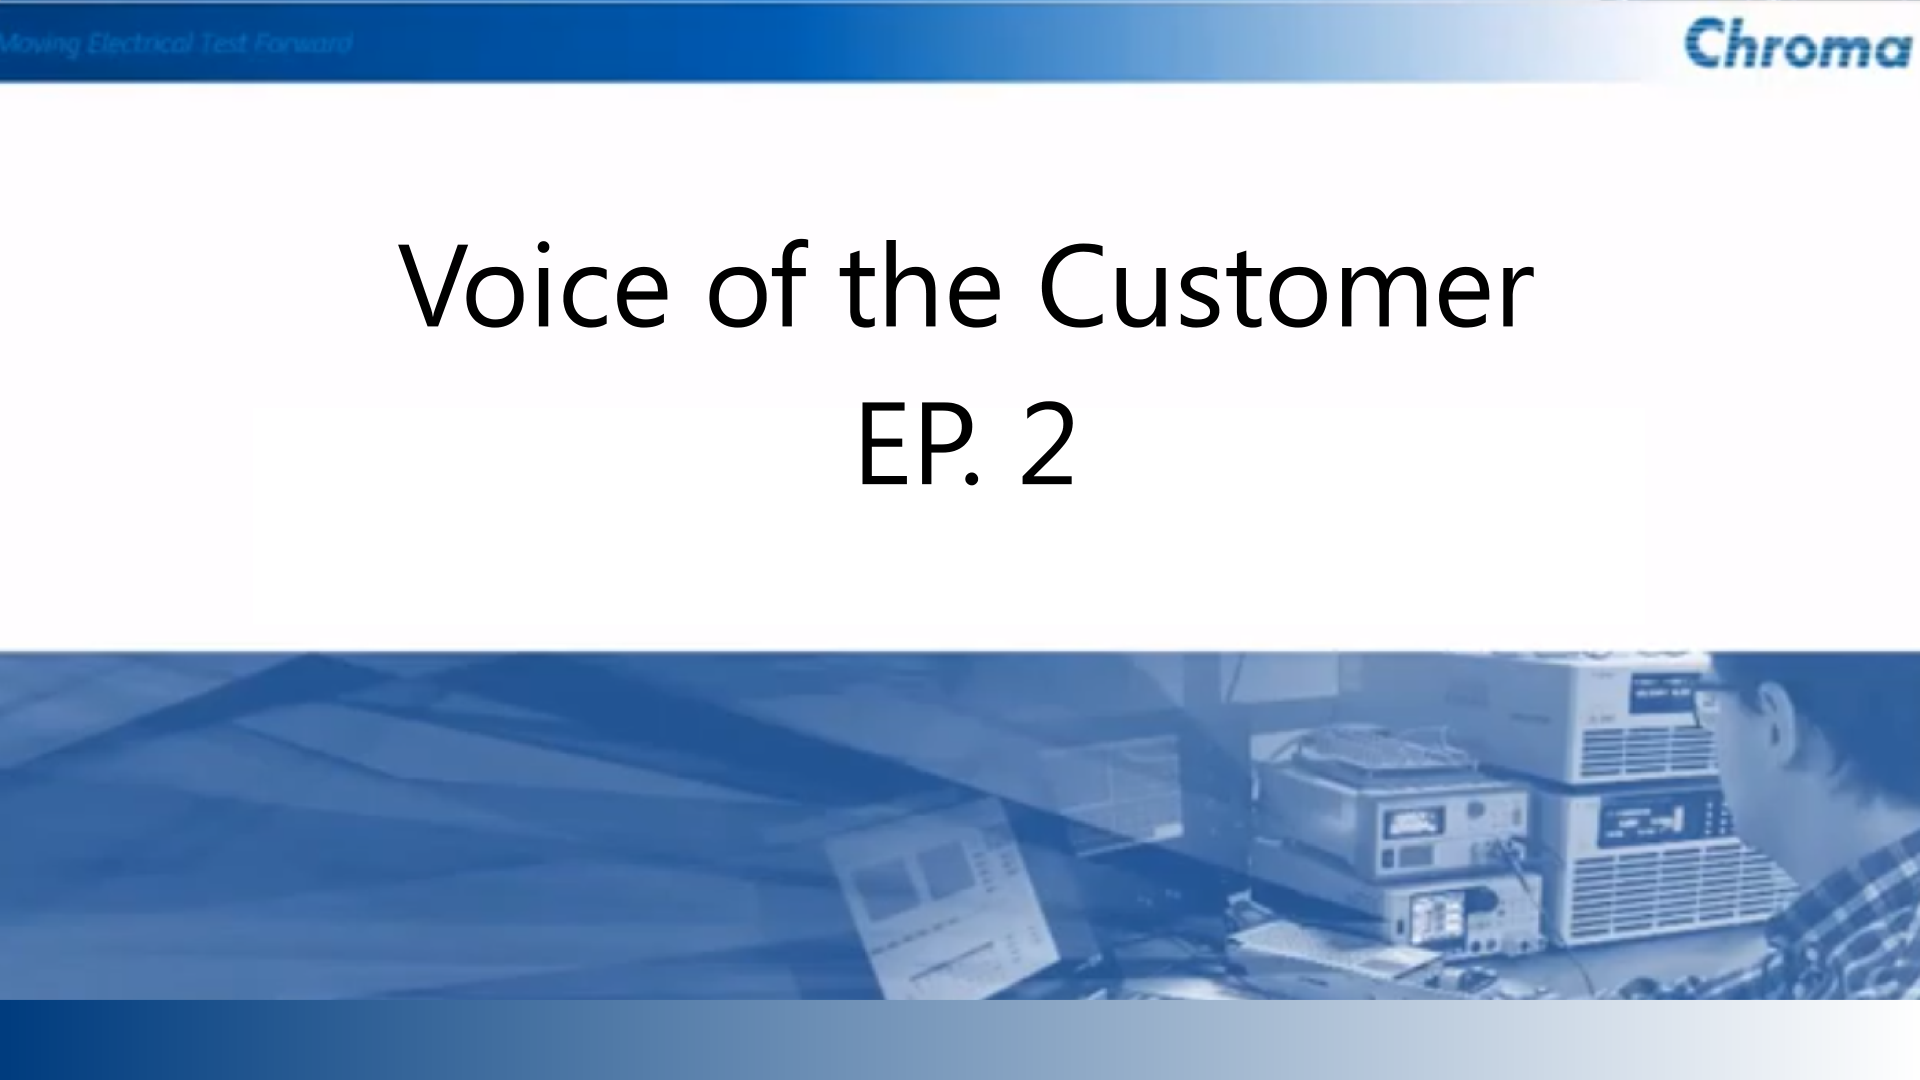 Voice of the Customer EP 2